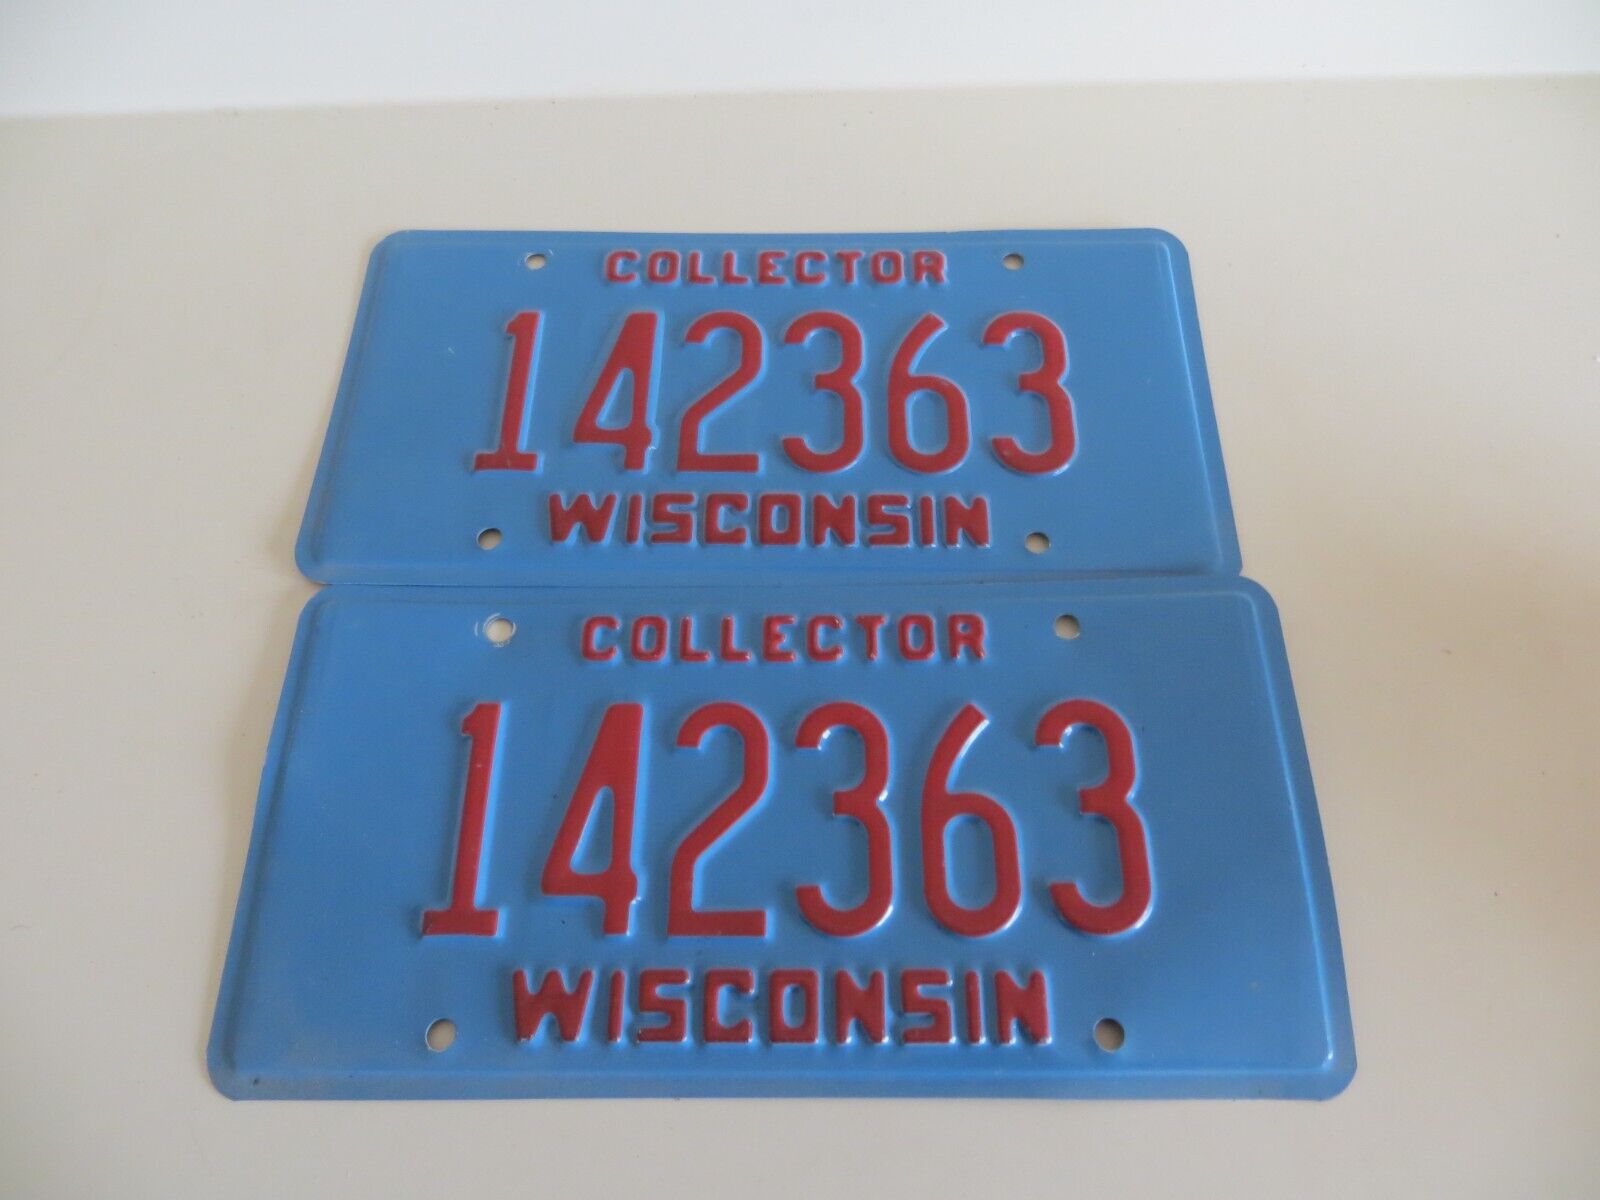 Wisconsin Collector License Plate Pair Vintage Anique Tag 142363 Rare Excellent